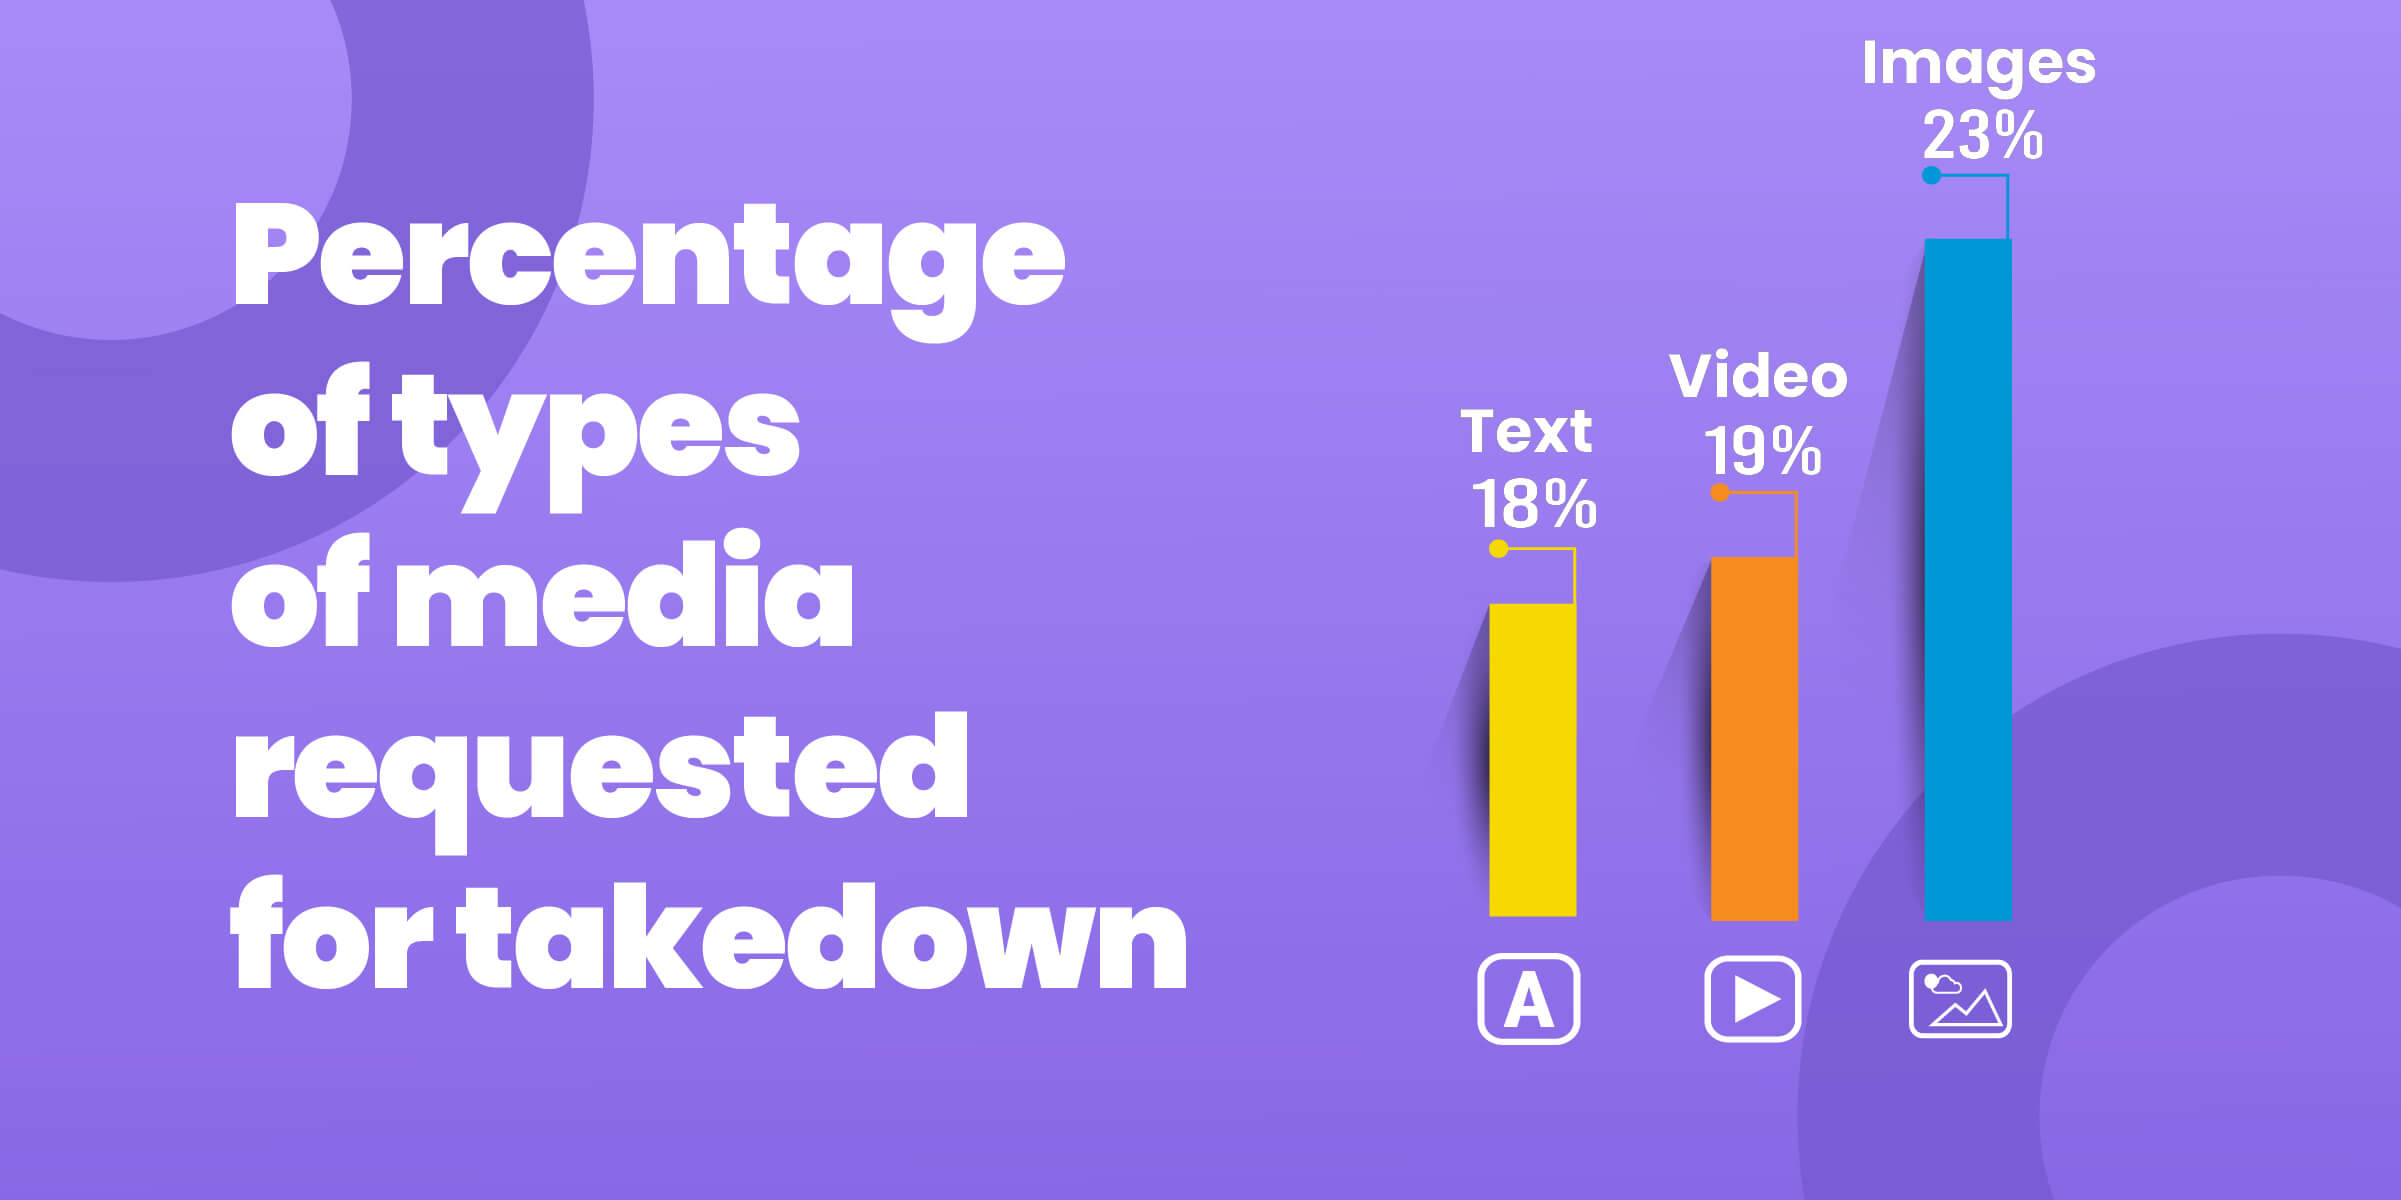 Percentage of Types of Media Request for Takedown